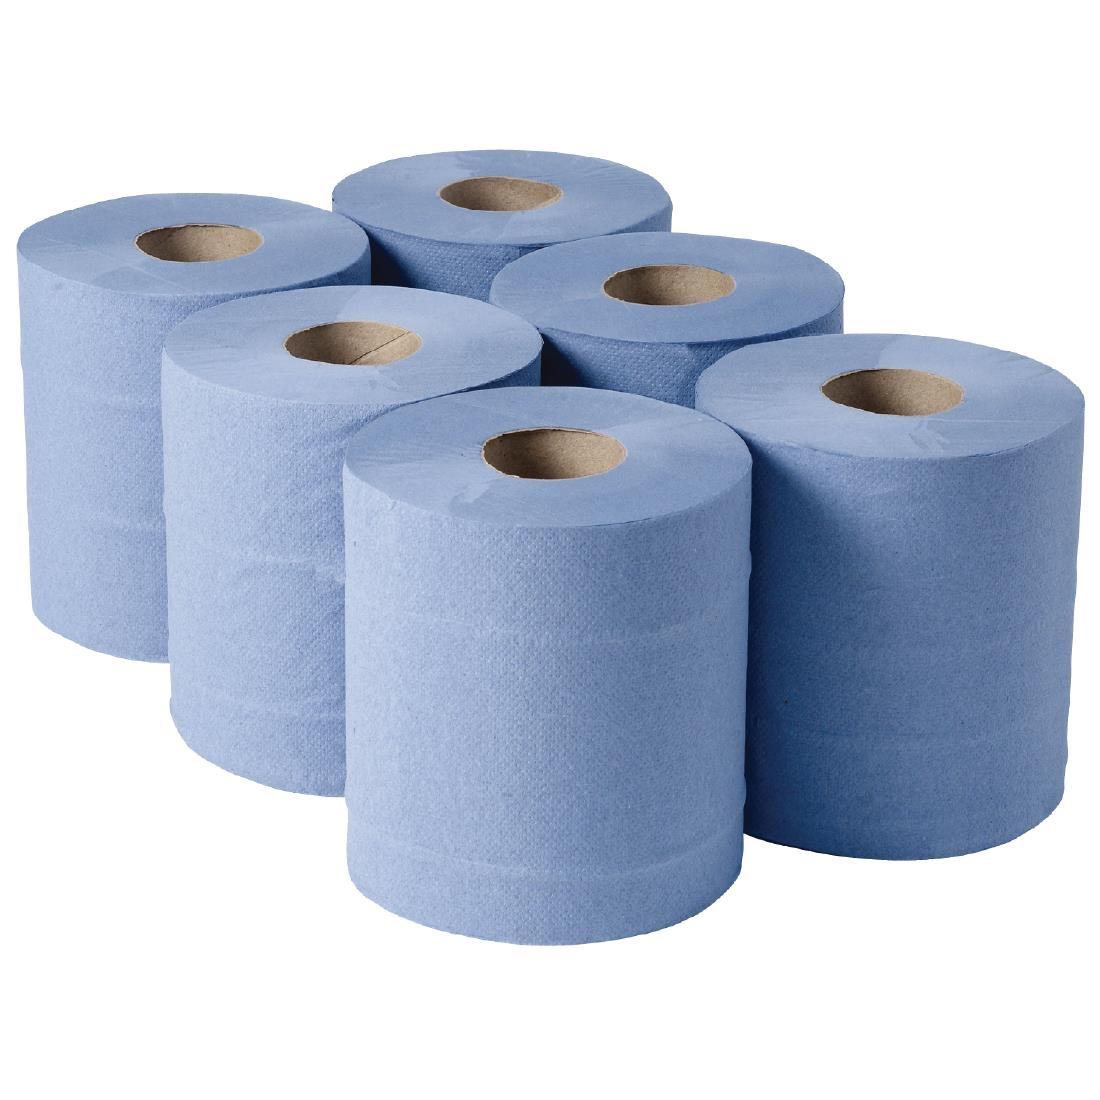 Jantex Centrefeed Blue Rolls 2-Ply 120m (Pack of 6) - DL921  - 1